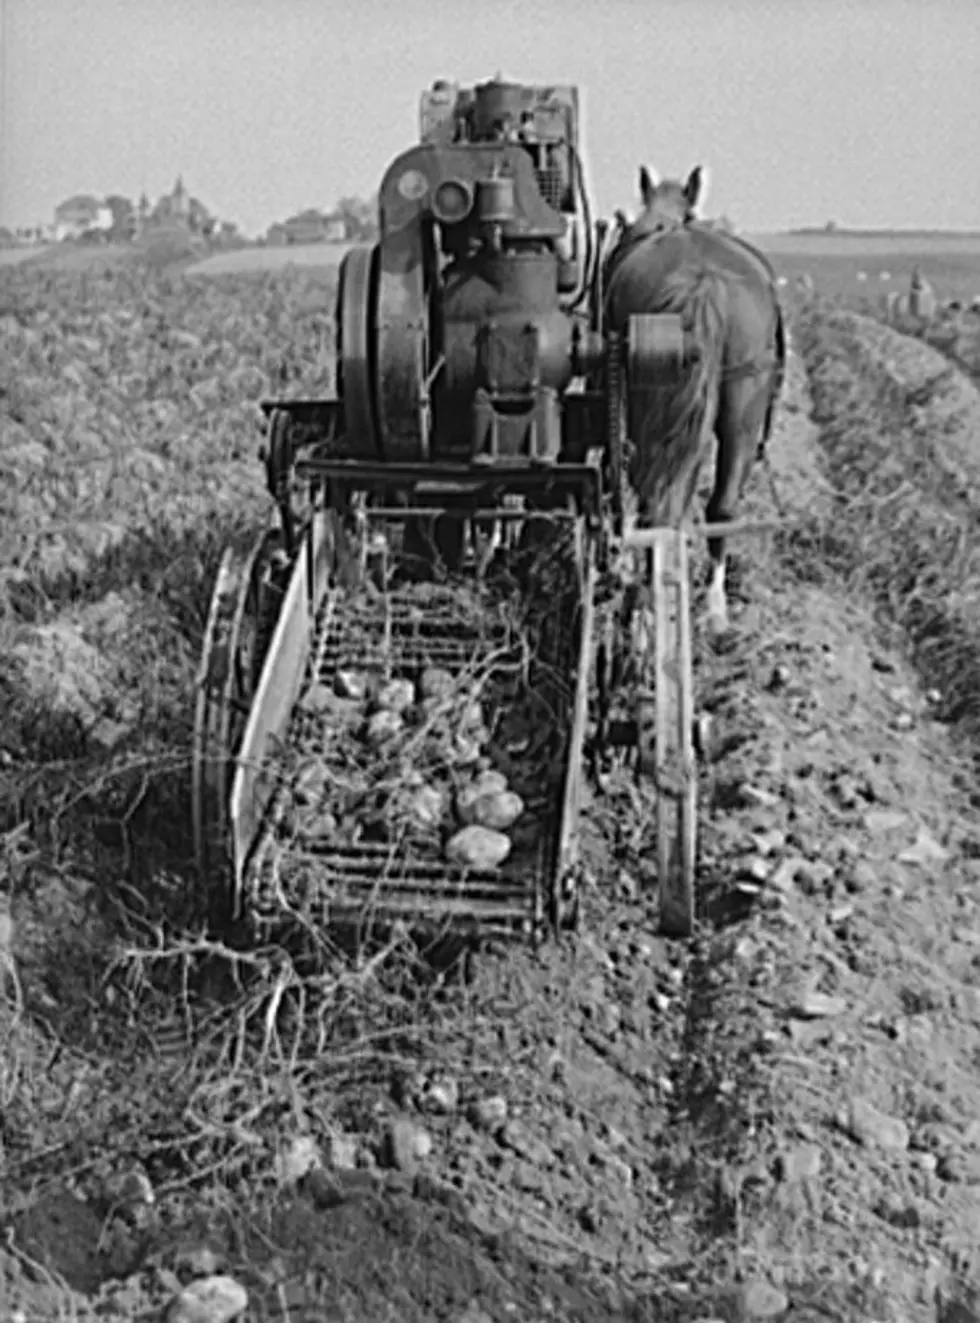 https://townsquare.media/site/529/files/2022/09/attachment-rear-view-of-a-single-row-potato-digger-used-on-a-small-farm-near-caribou-maine.jpg?w=980&q=75